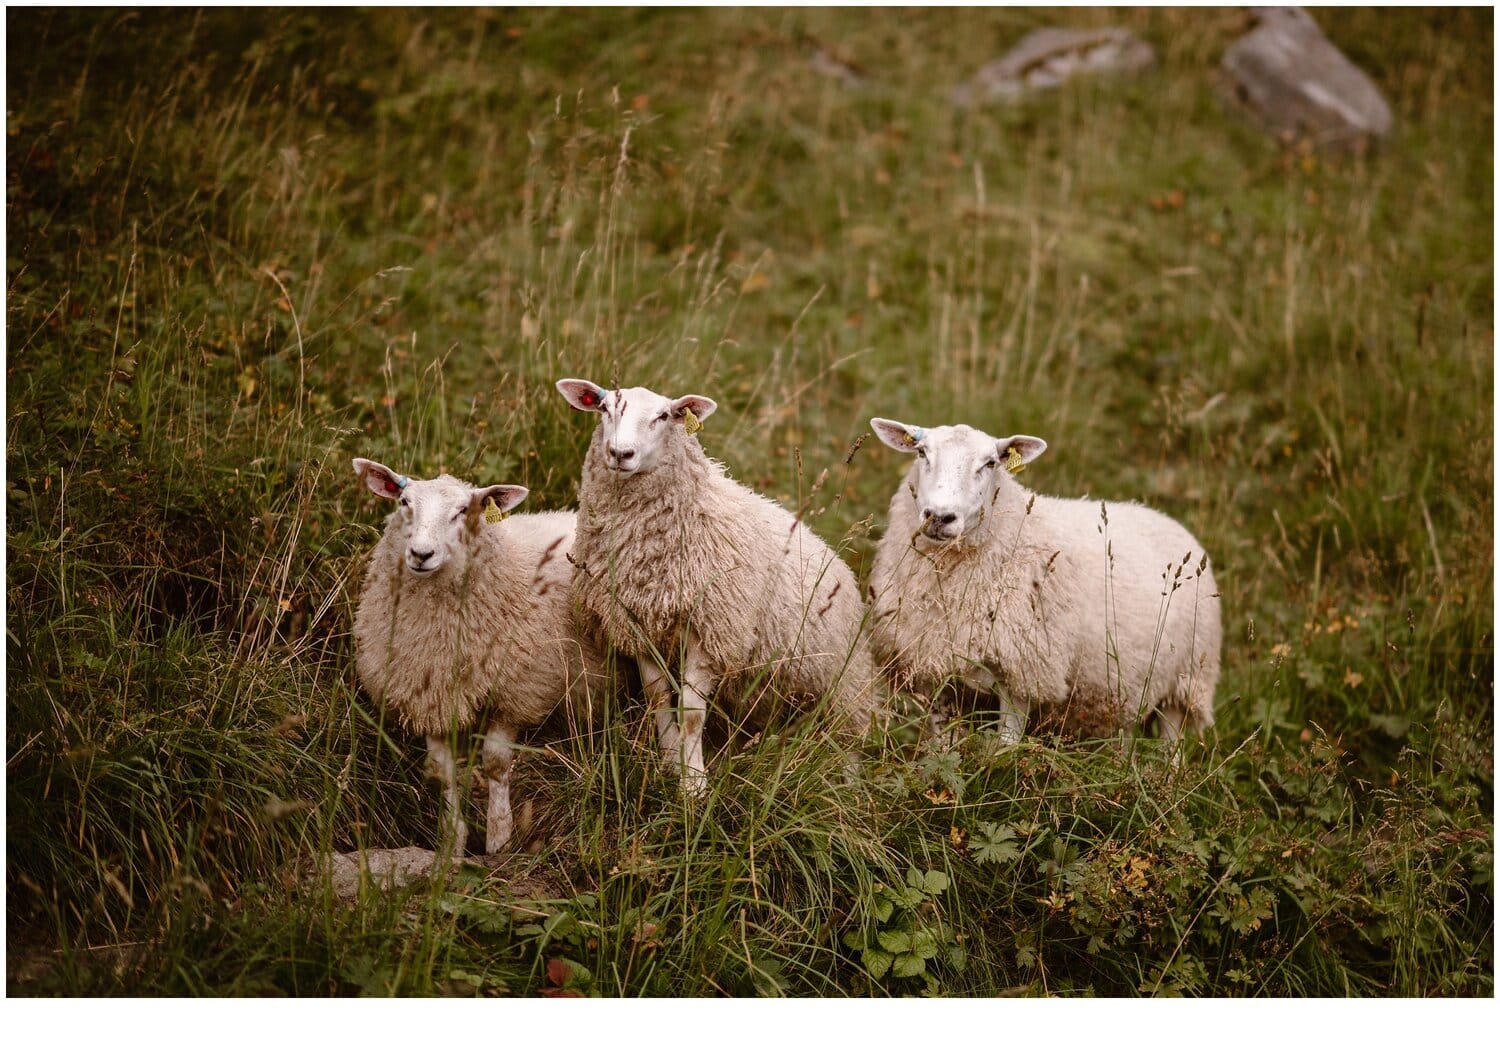 Three sheep in Norway.